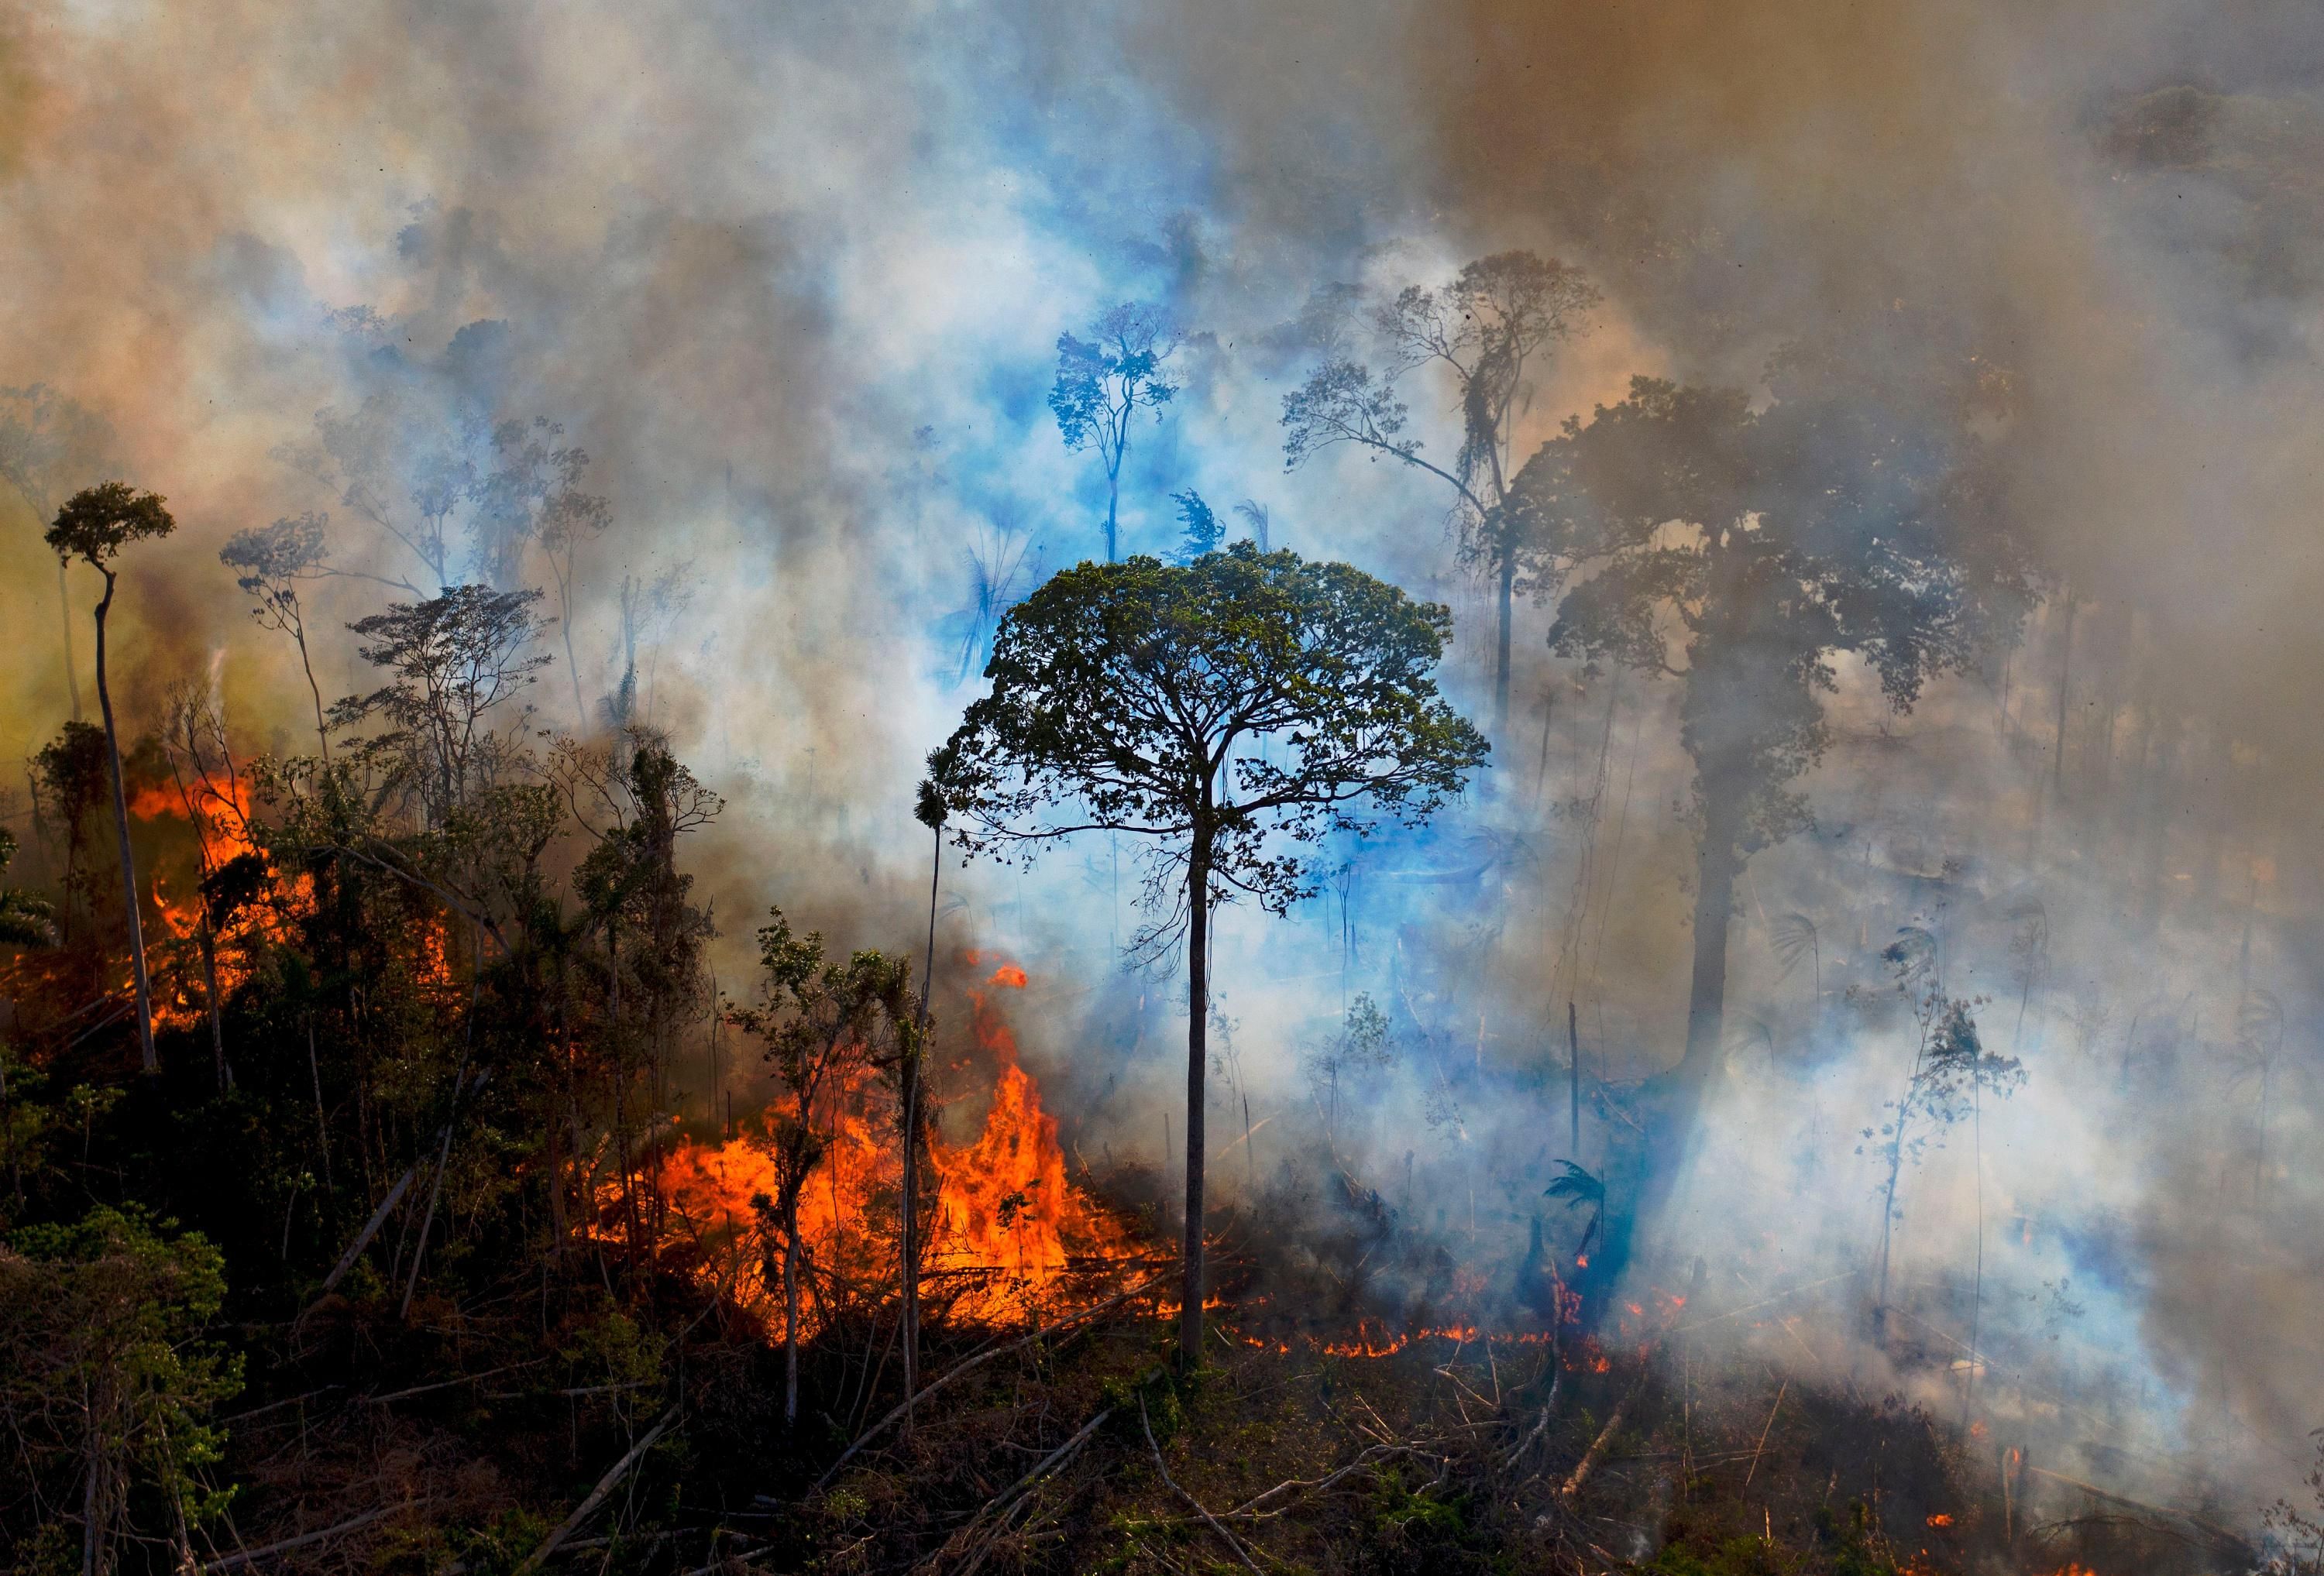 A fire burns in the Amazon rainforest